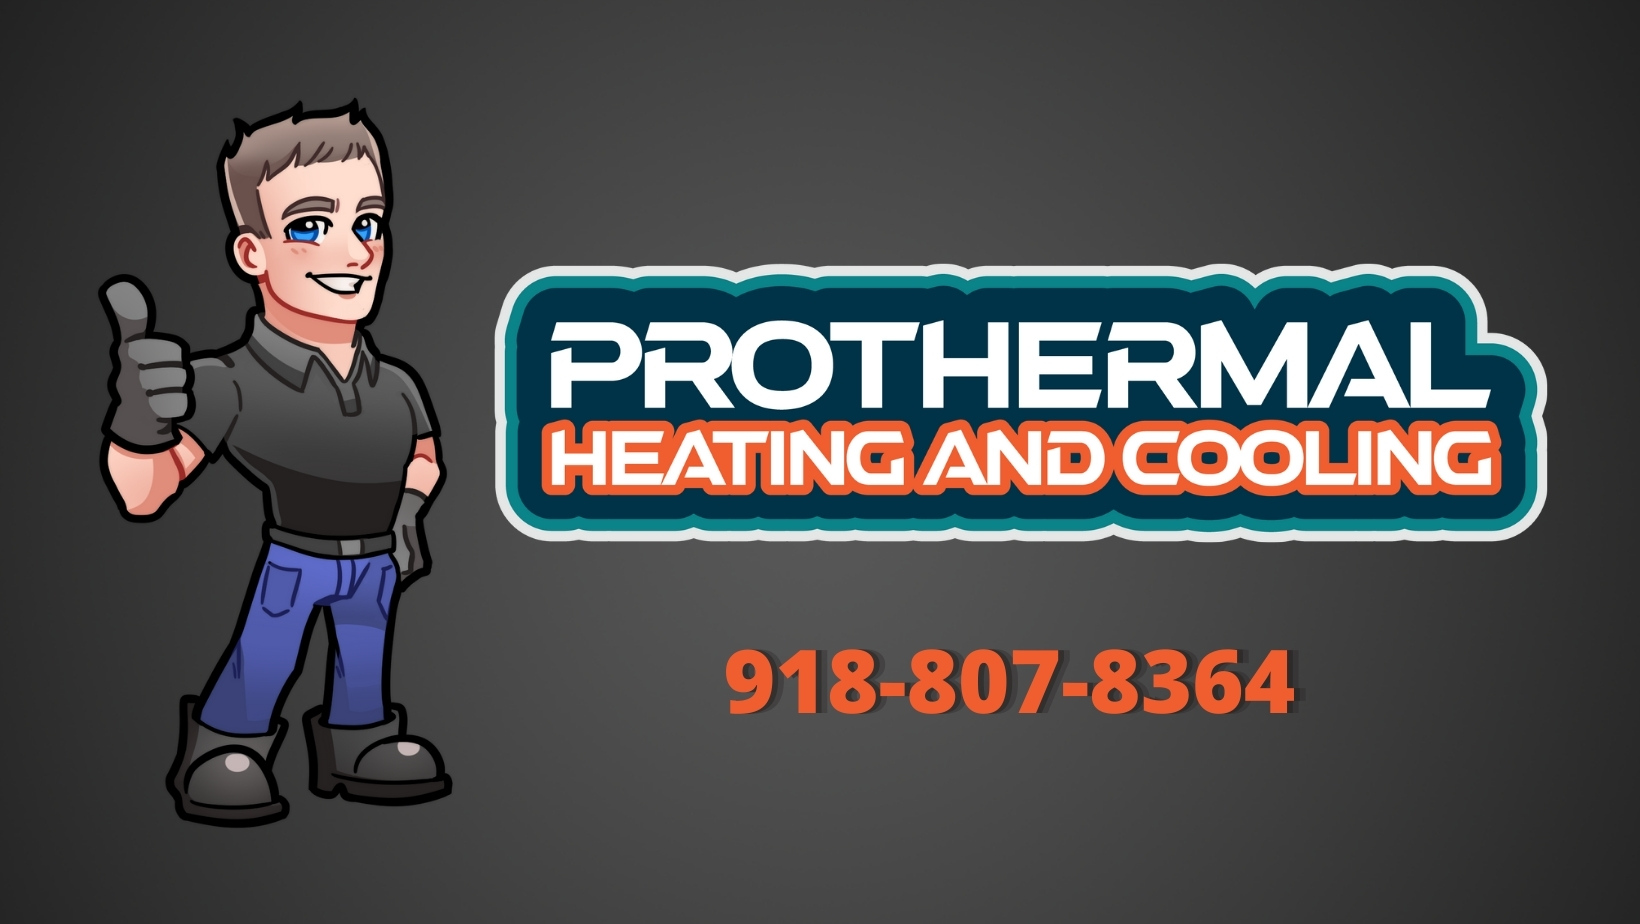 ProThermal Heating and Cooling Logo